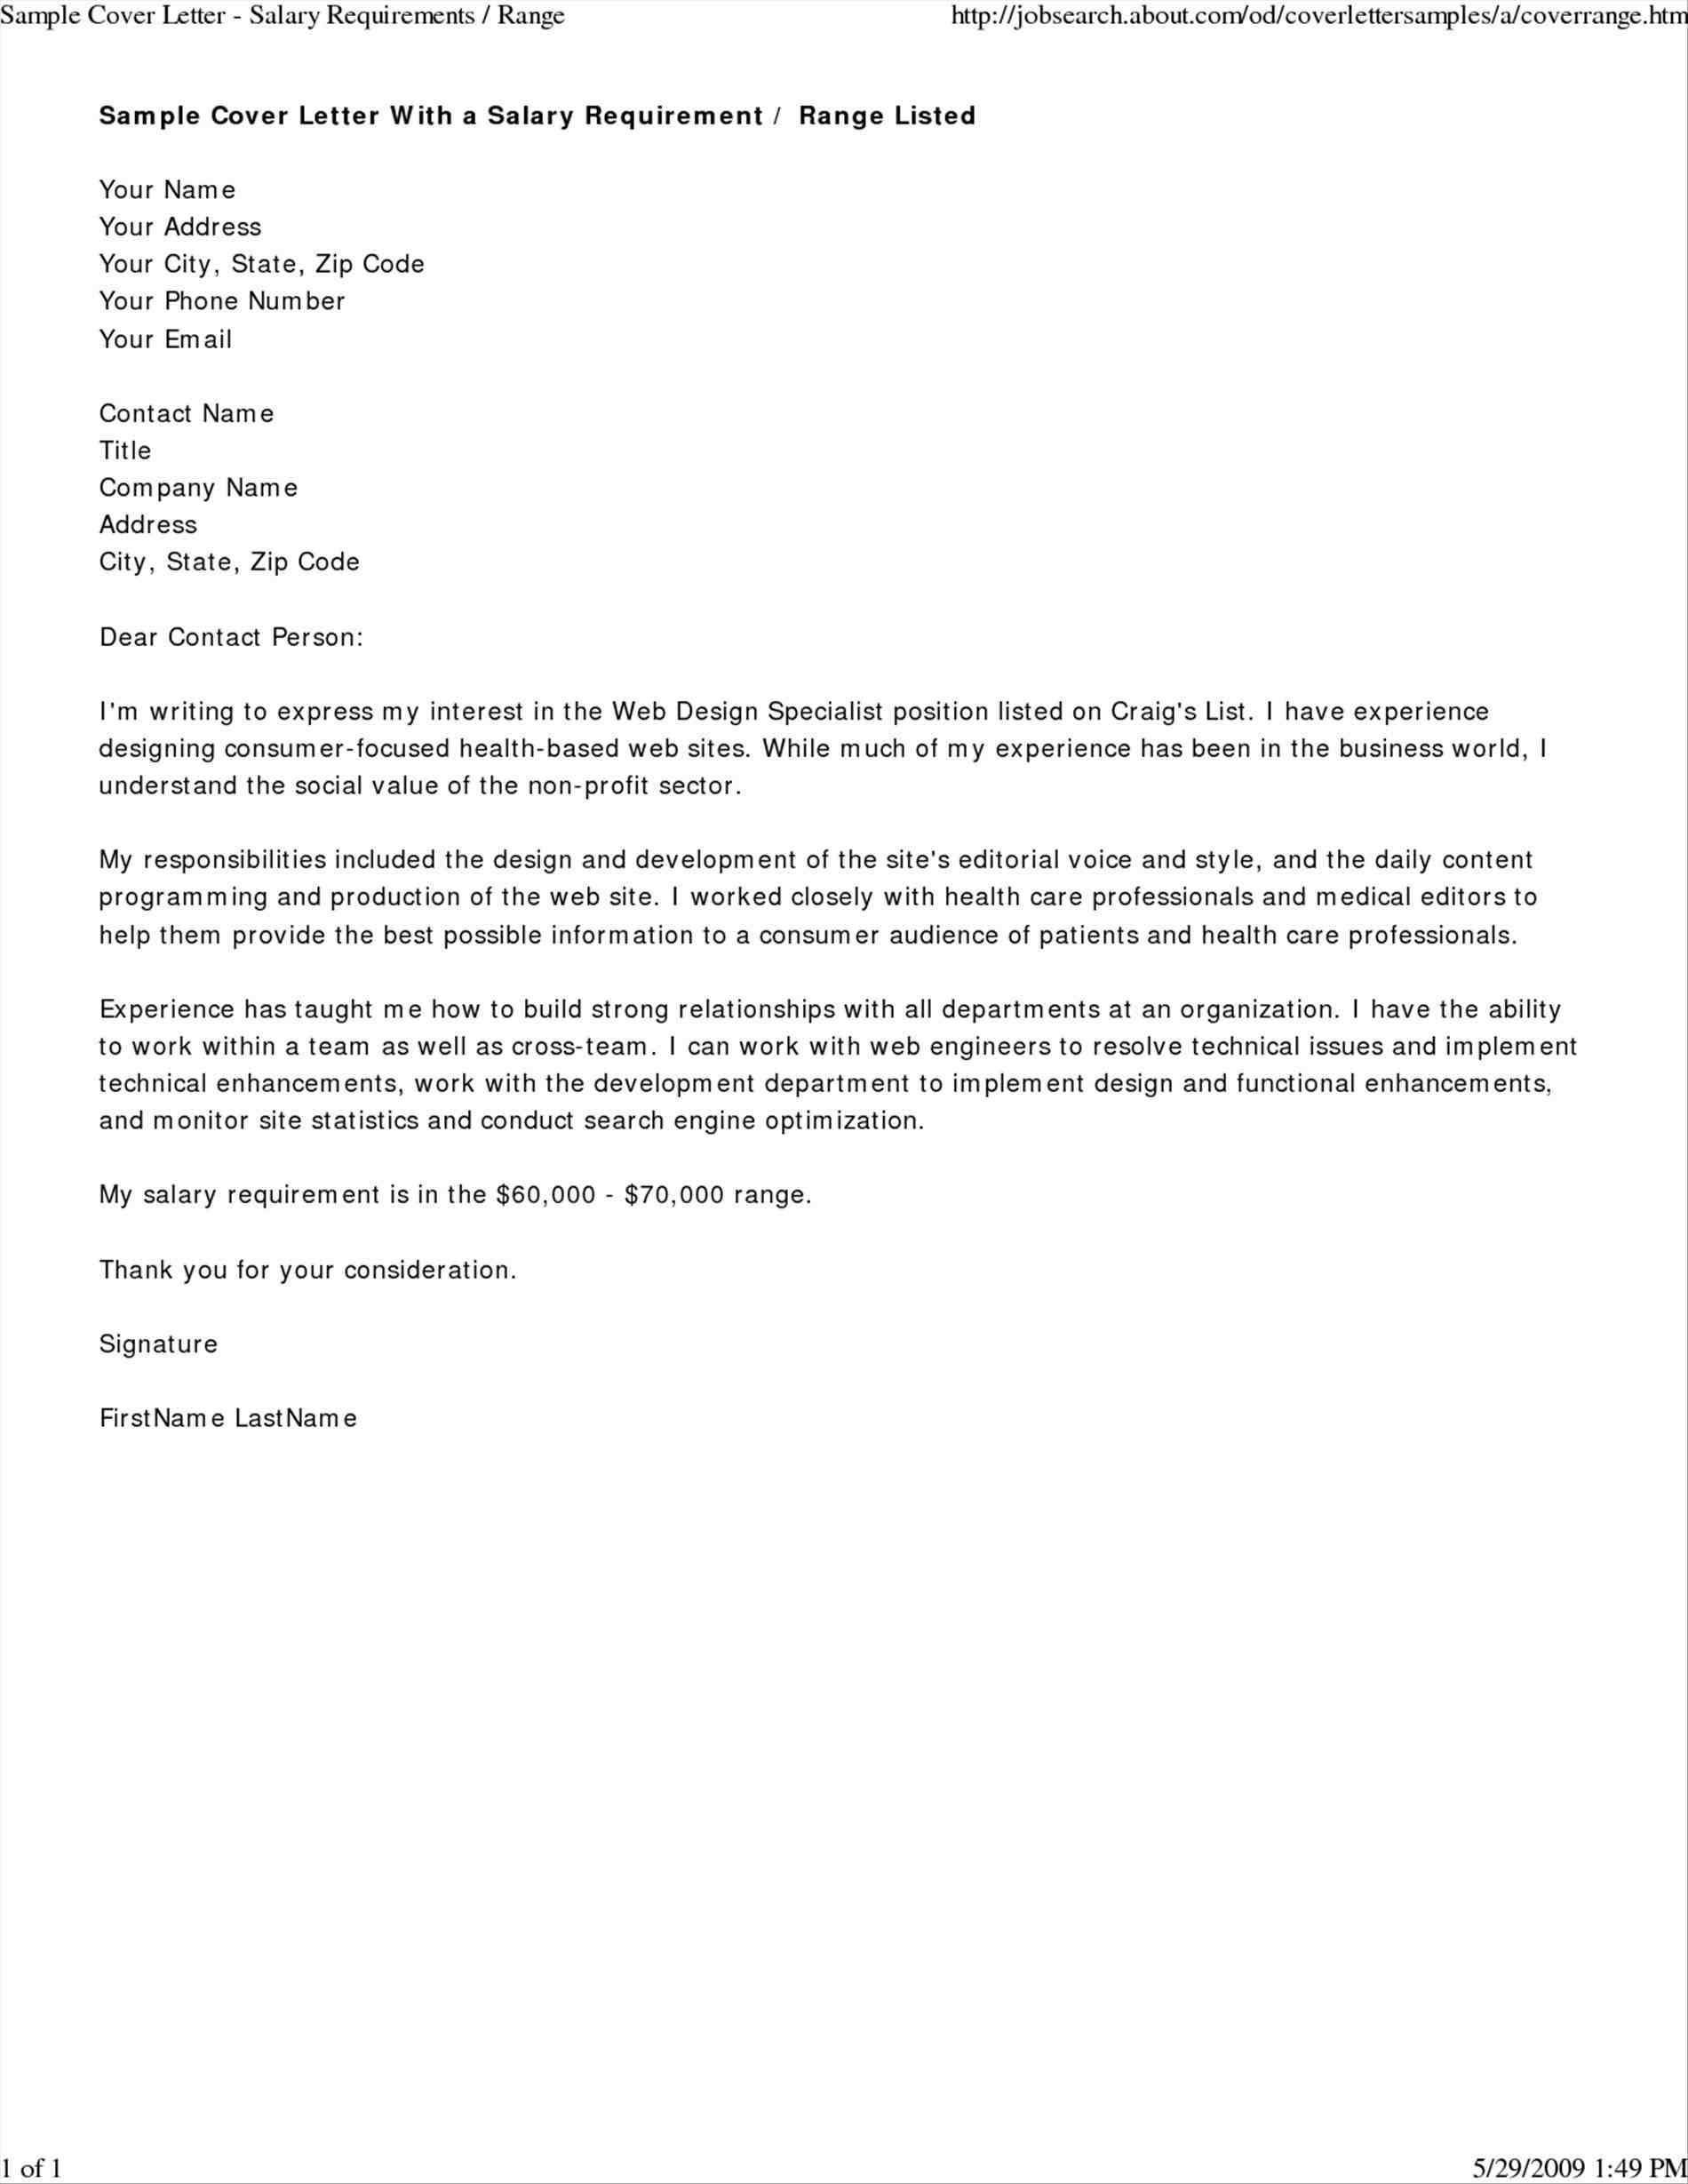 Patient Recall Letter Template - Sample Cover Letter for Jobs Recordplayerorchestra